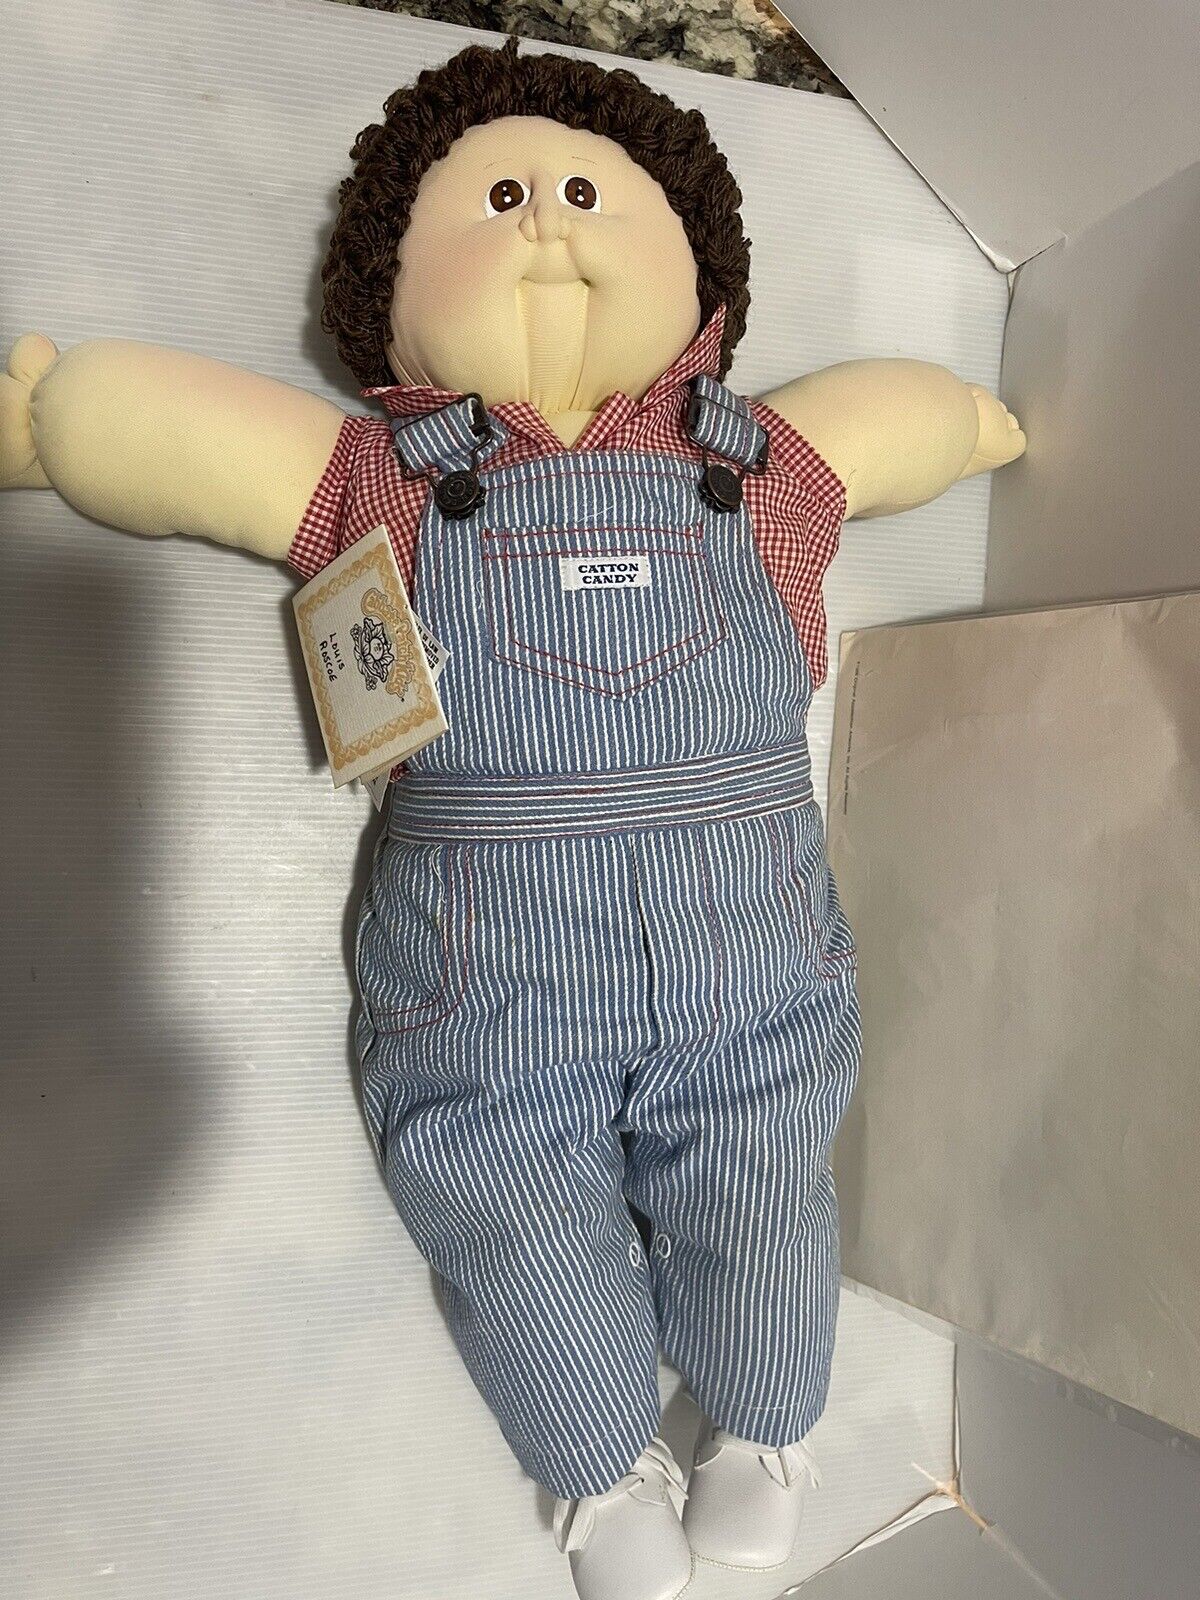 RARE 1985 The Little People Louis Roscie  Soft Sculpture Cabbage Patch